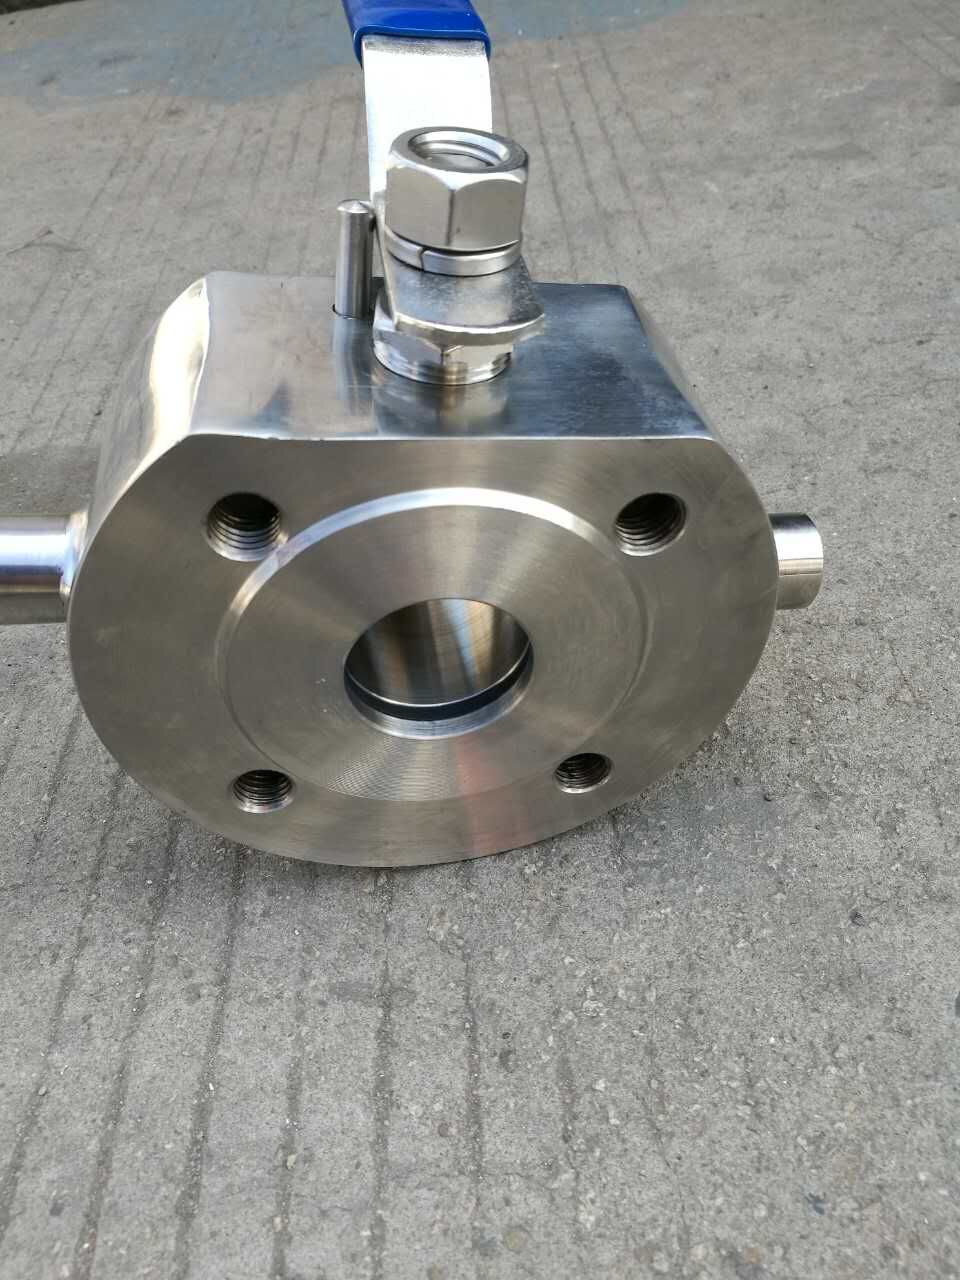 The Structural Features on Wafer Ball Valves